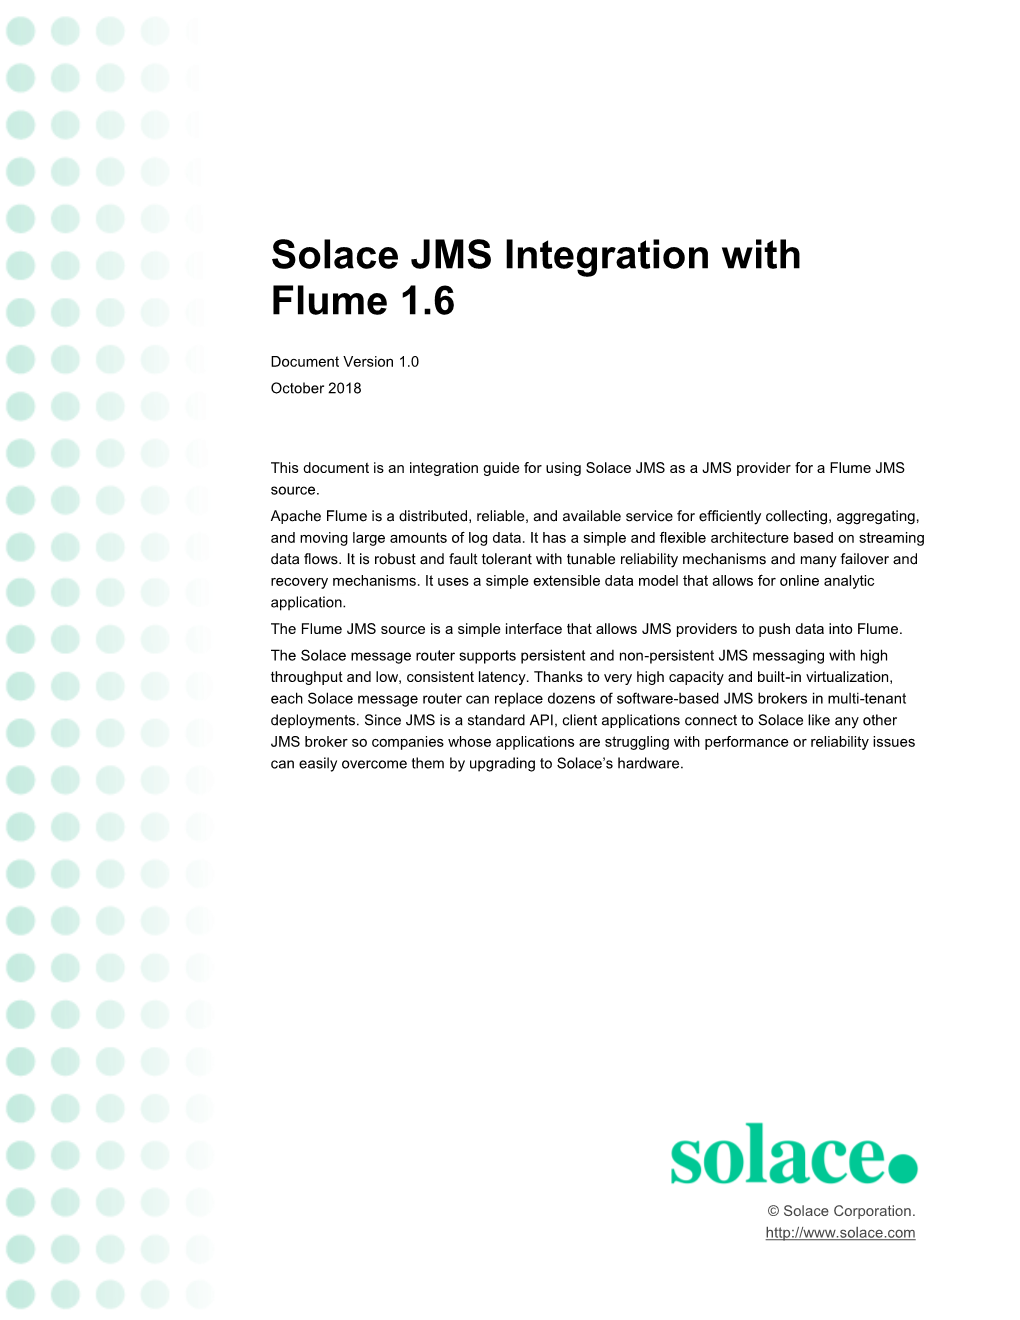 Solace JMS Integration with Flume 1.6